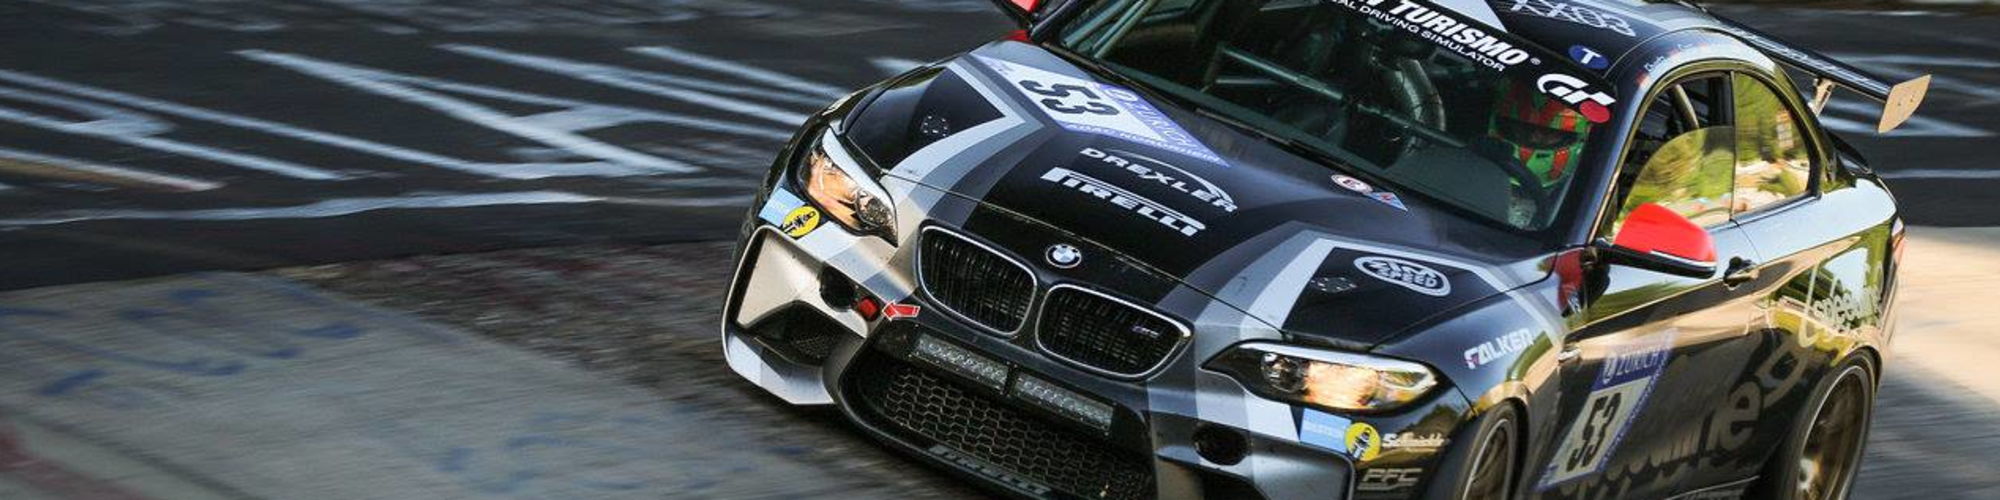 Nitron Racing Systems Ltd. cover image